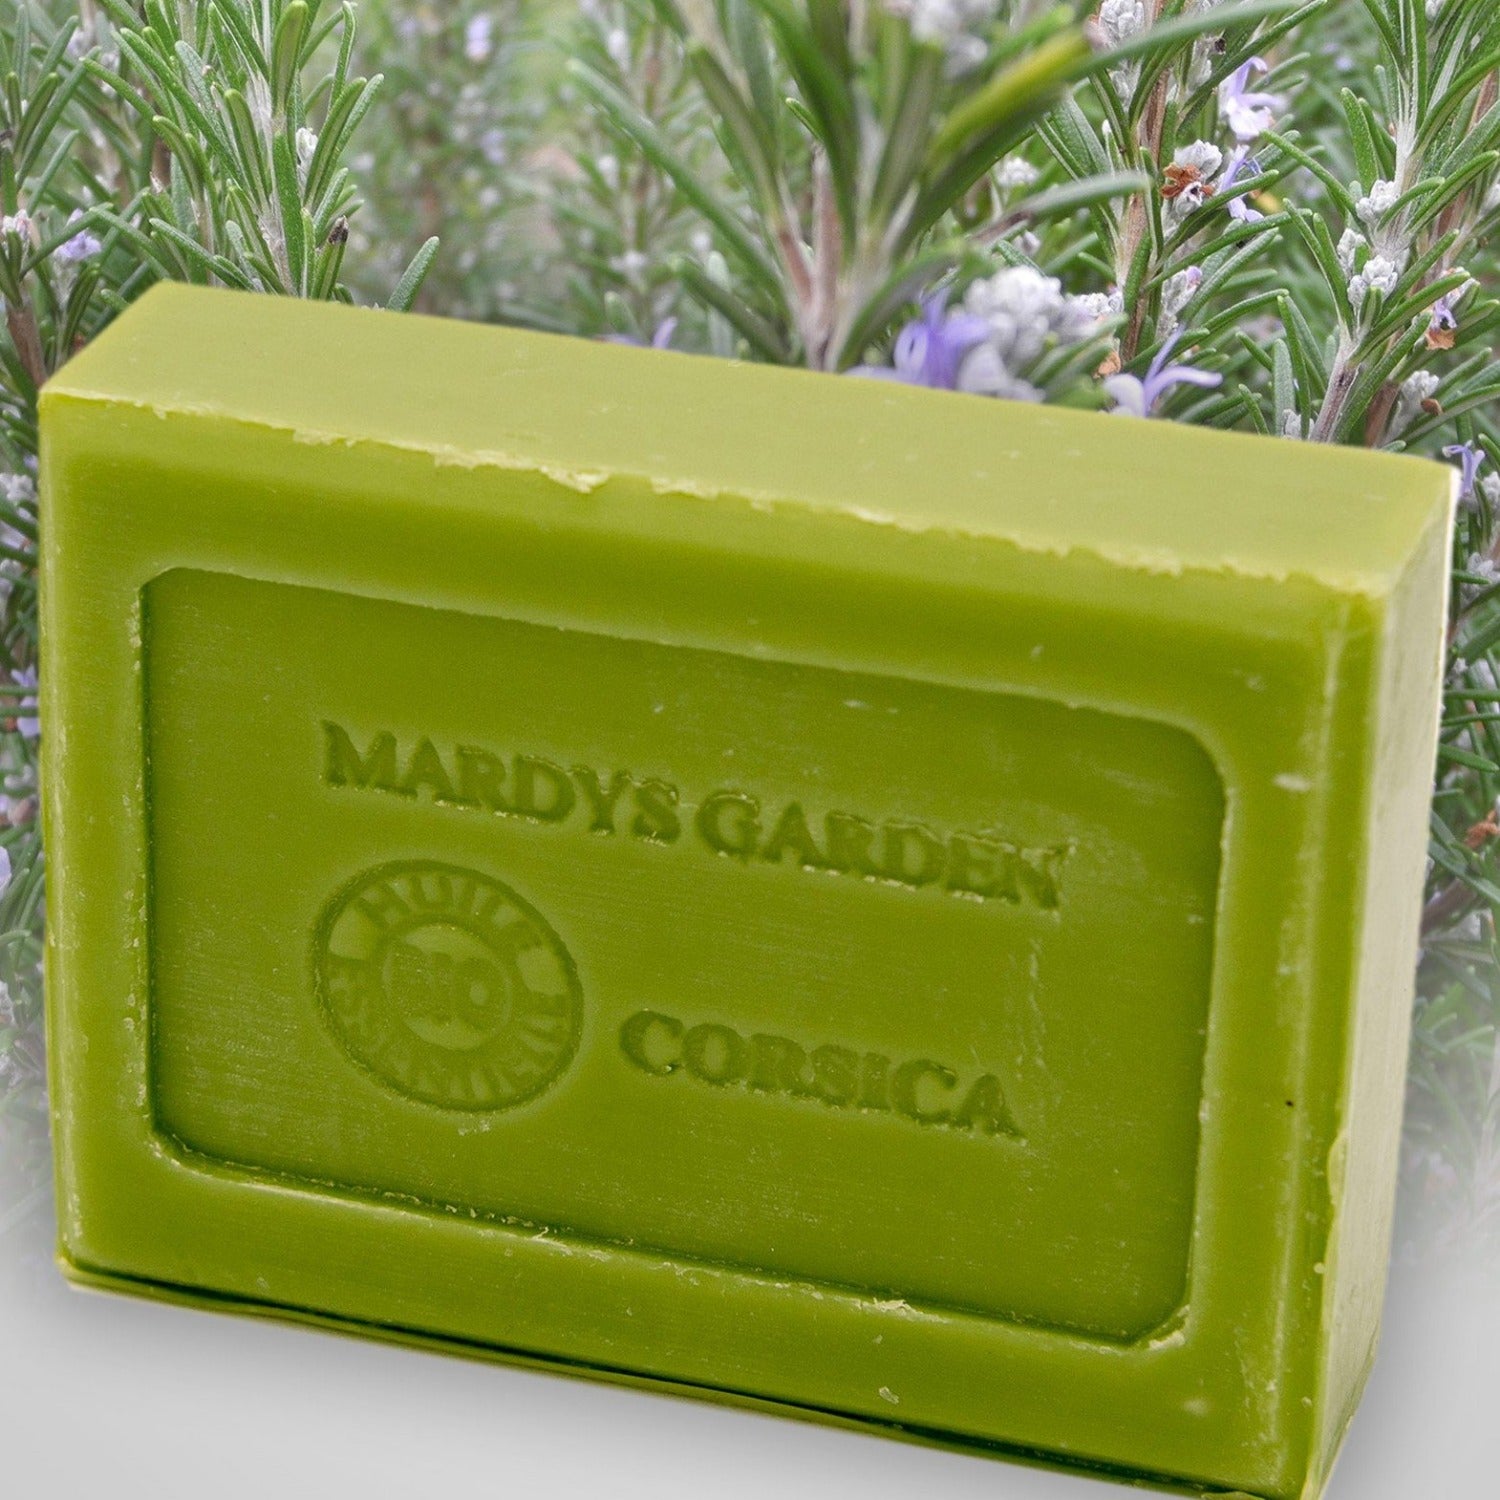 Rosemary Soap 100g. Refreshes skin. Scented with organic hydrosol and essential oil. All the properties of Corsican Immortelle and Rosemary for your skin. Natural skincare product. Gently clean, soothes and washes